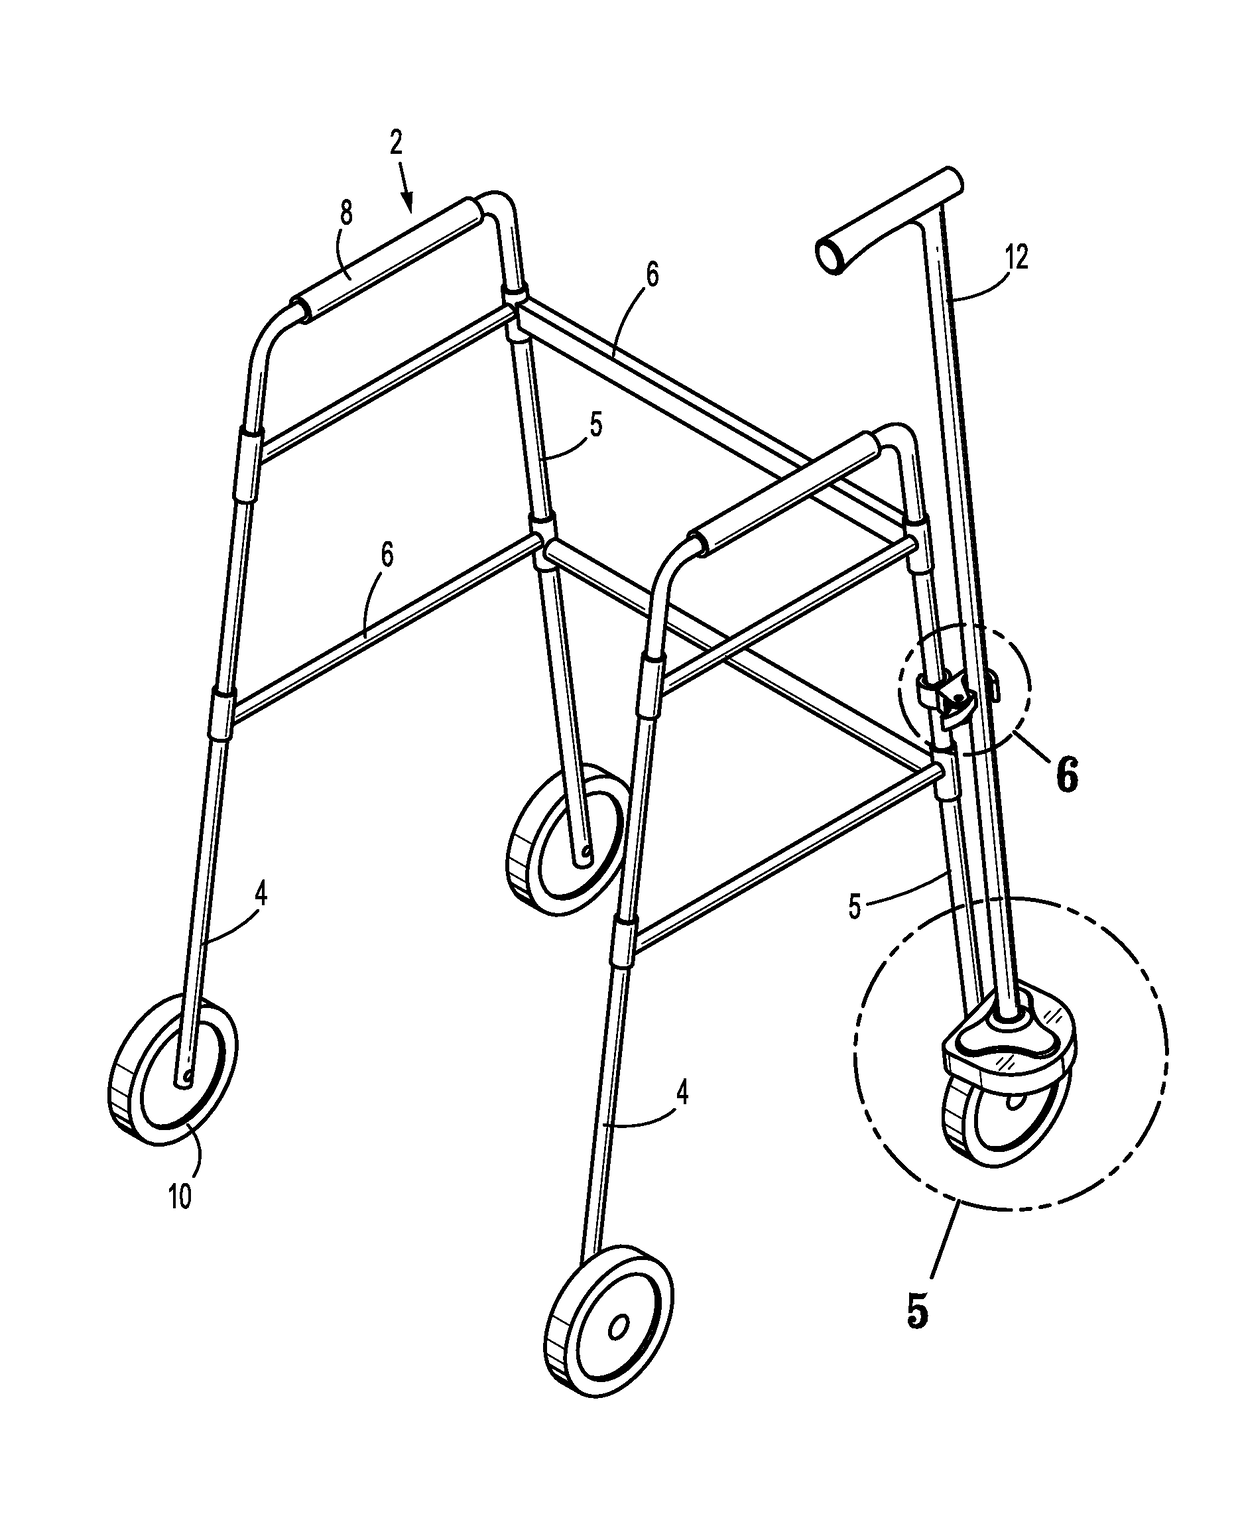 Walking cane clamp and base for use with walkers and rollators